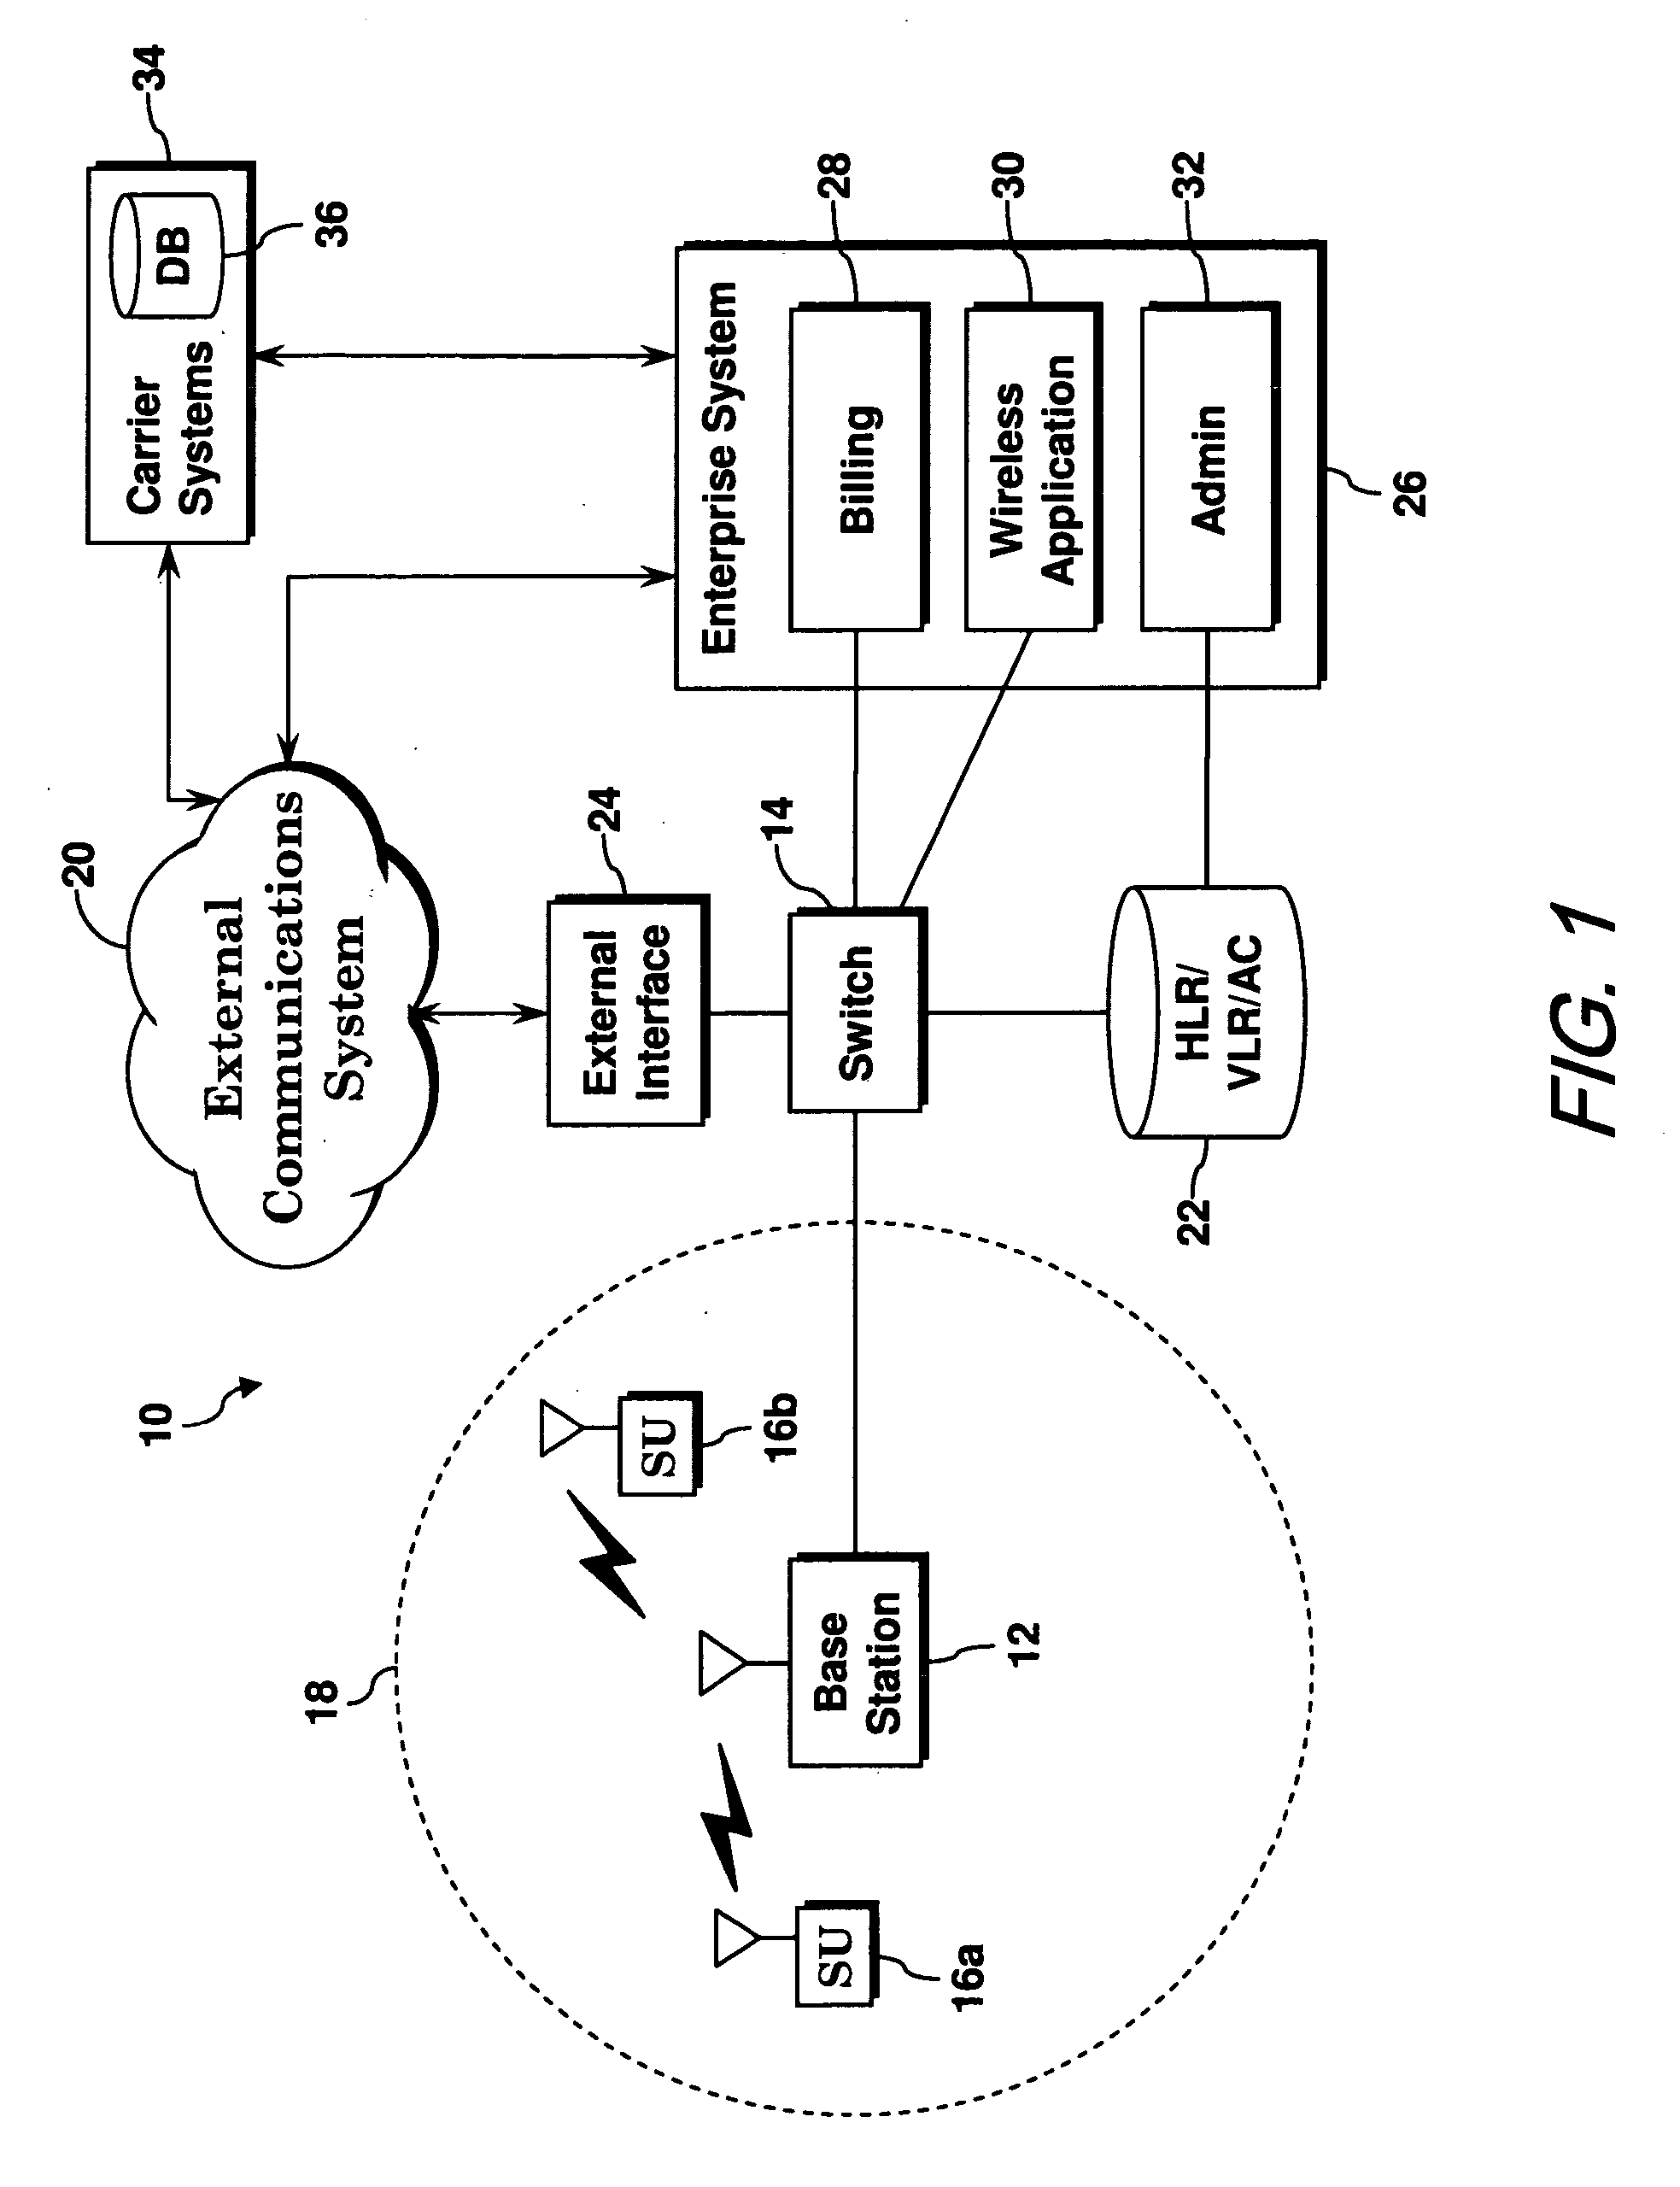 System and method for operating a private wireless communications system